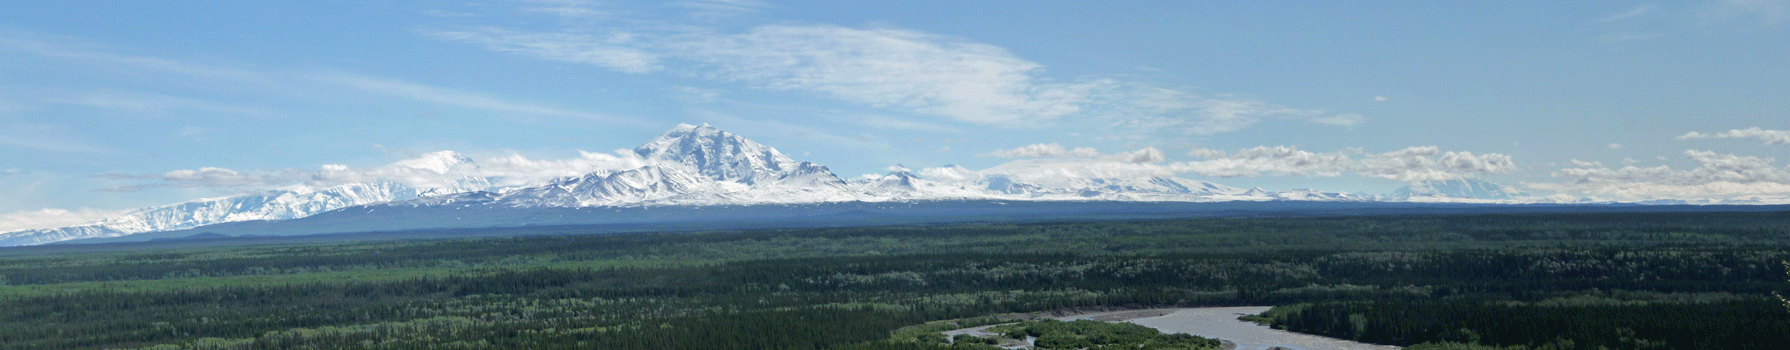 Mt Drum and Sanford from Richardson Highway viewpoint Alaska